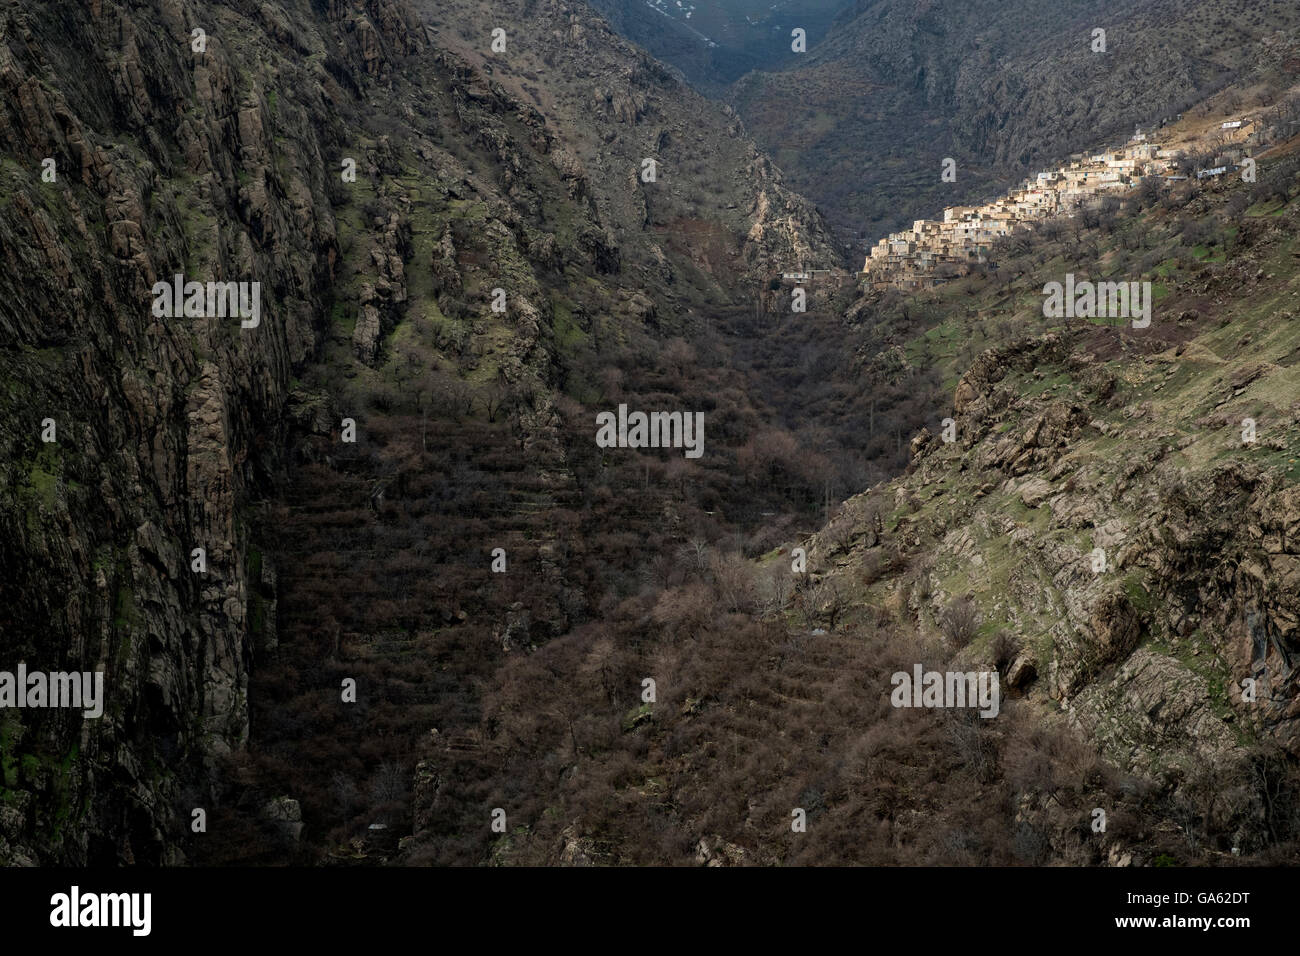 Hewraman Village is located in Challenging Valley in Zagros Mountain. Stock Photo